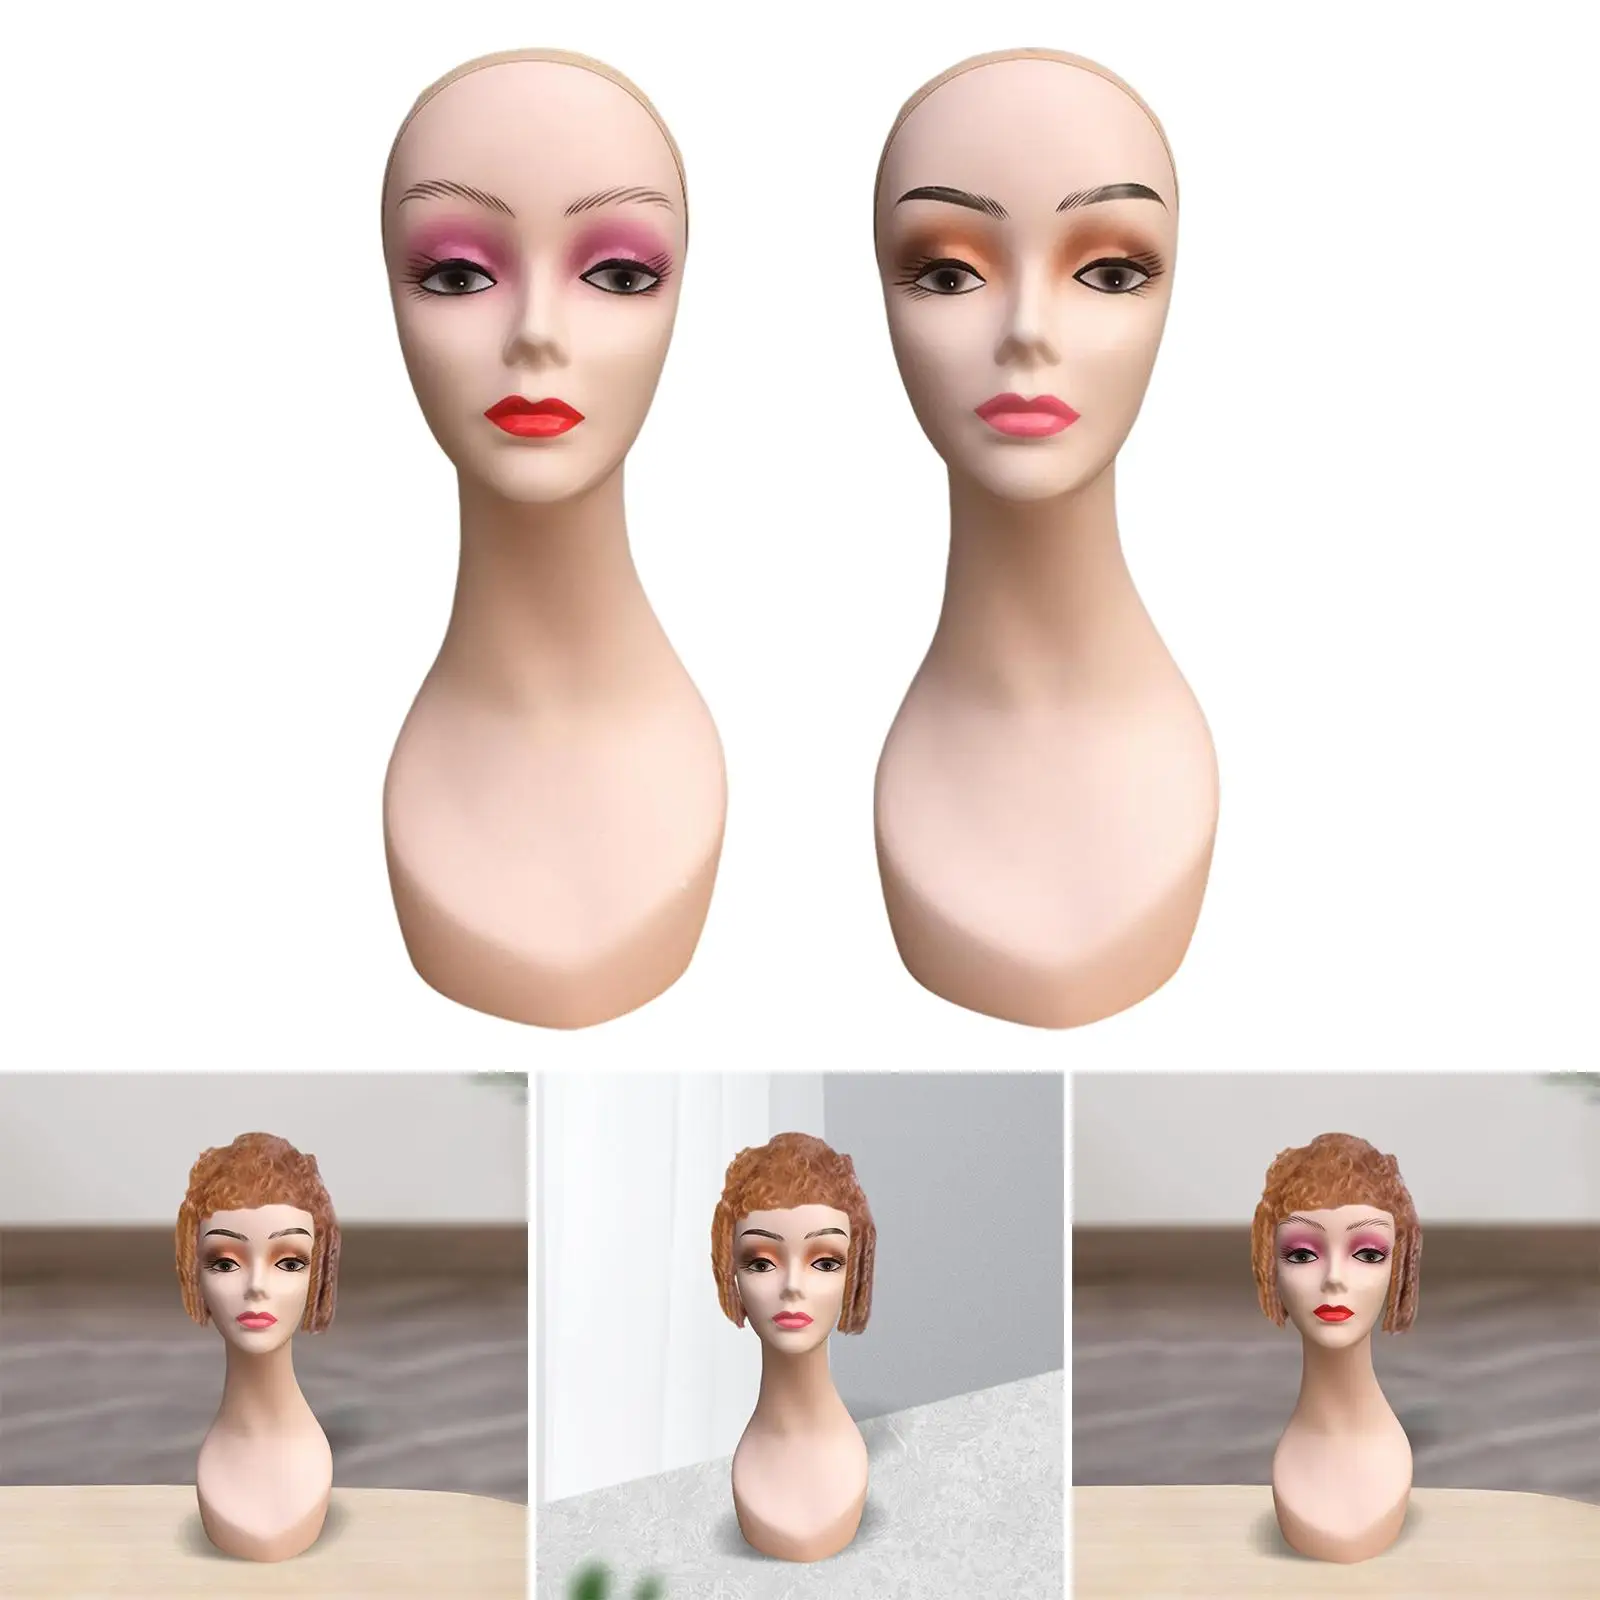 Women Mannequin Head with Makeup Durable Female Manikin Wig Head Stand for Headscarves Hairpieces Necklaces Jewelry Glasses Hats